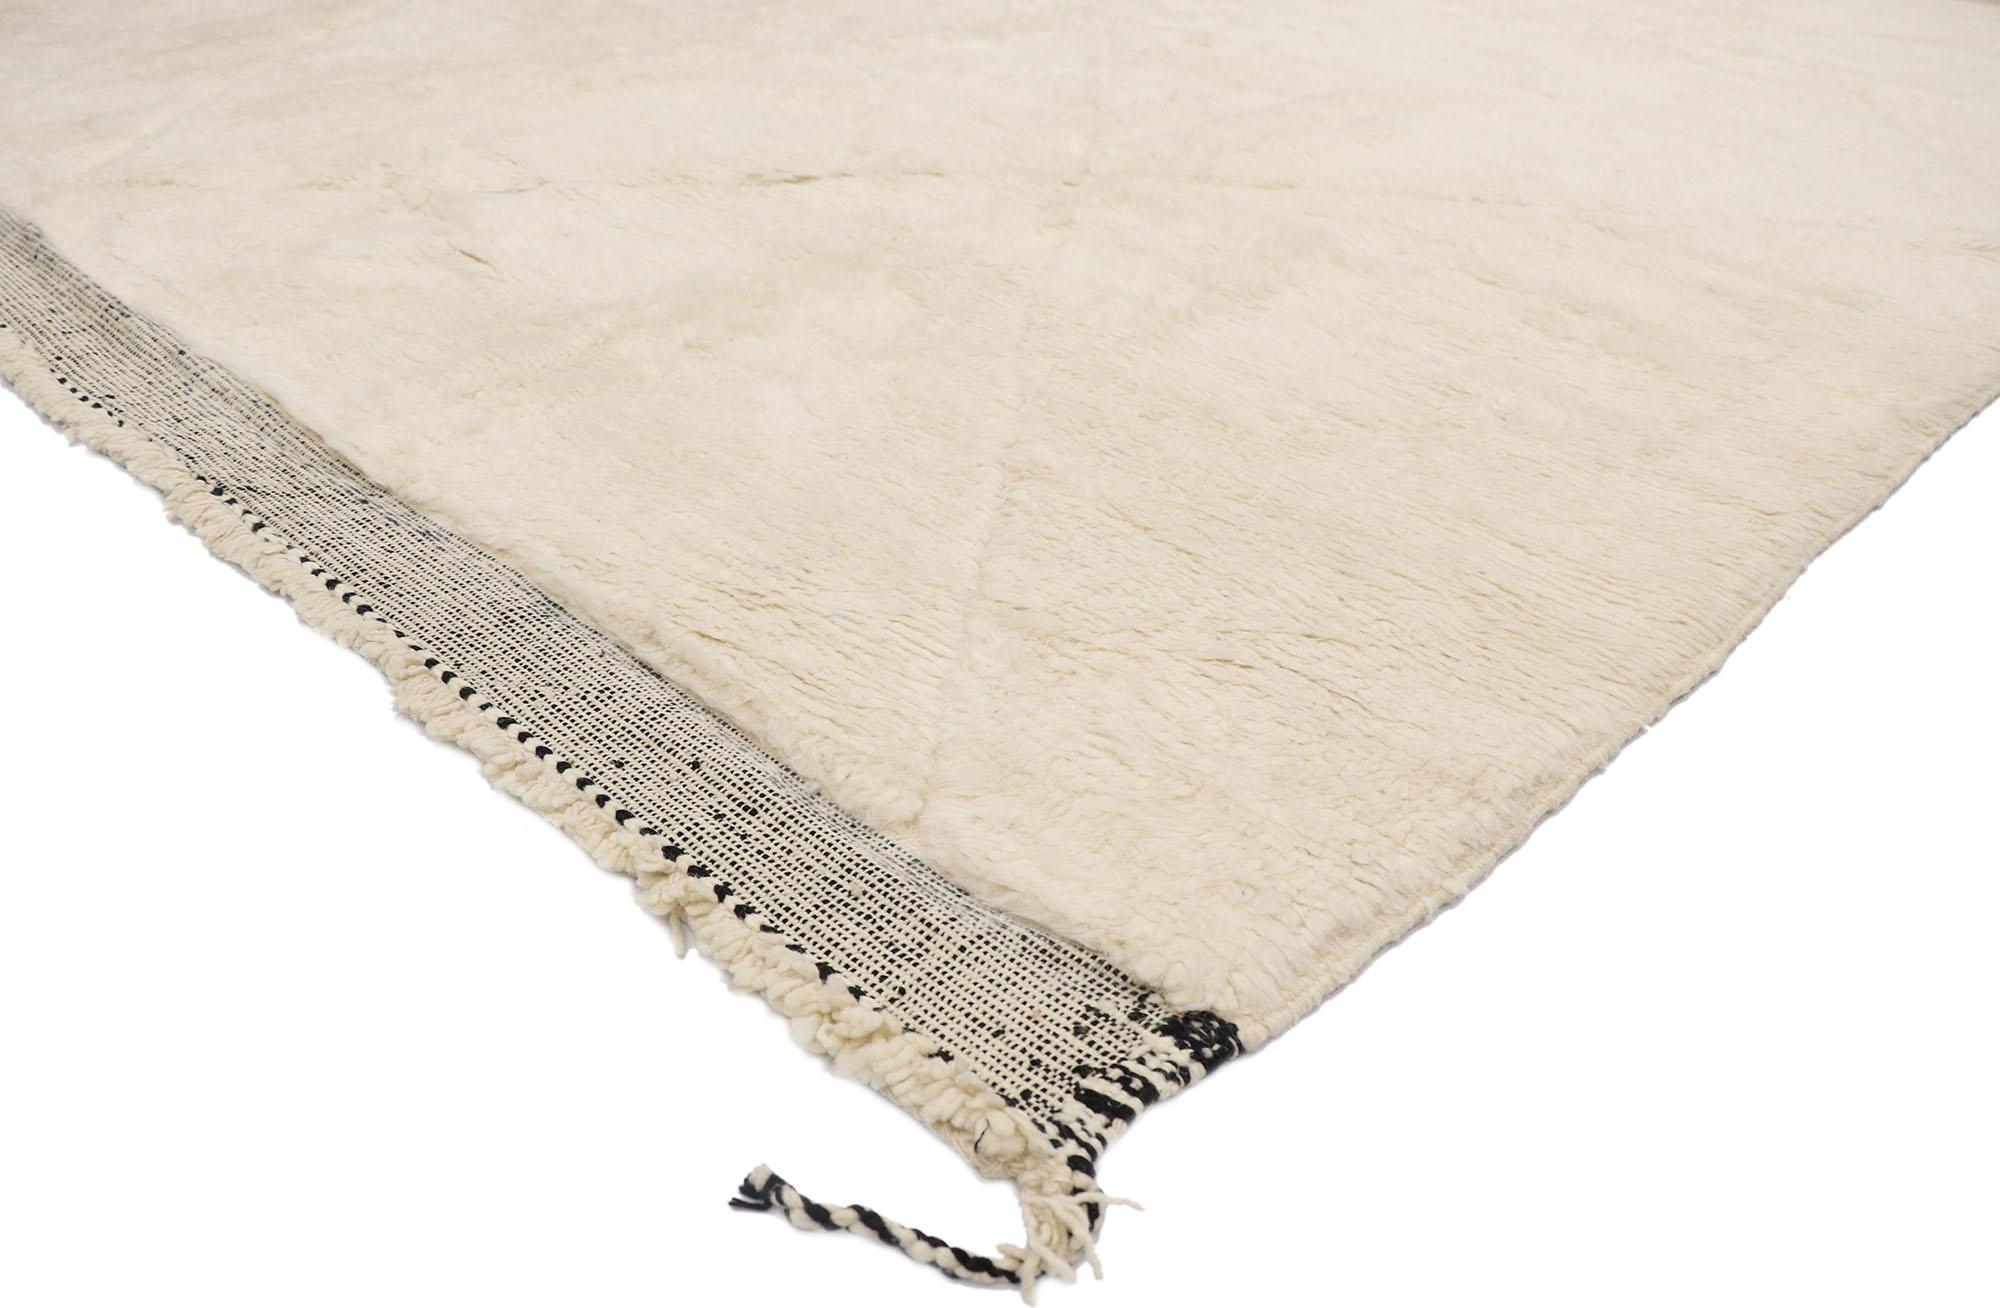 21150 New contemporary Berber Moroccan rug with minimalist style 10'06 x 12'01. With its simplicity, plush pile and Hygge vibes, this hand knotted wool contemporary Berber Moroccan rug provides a feeling of cozy contentment without the clutter. It